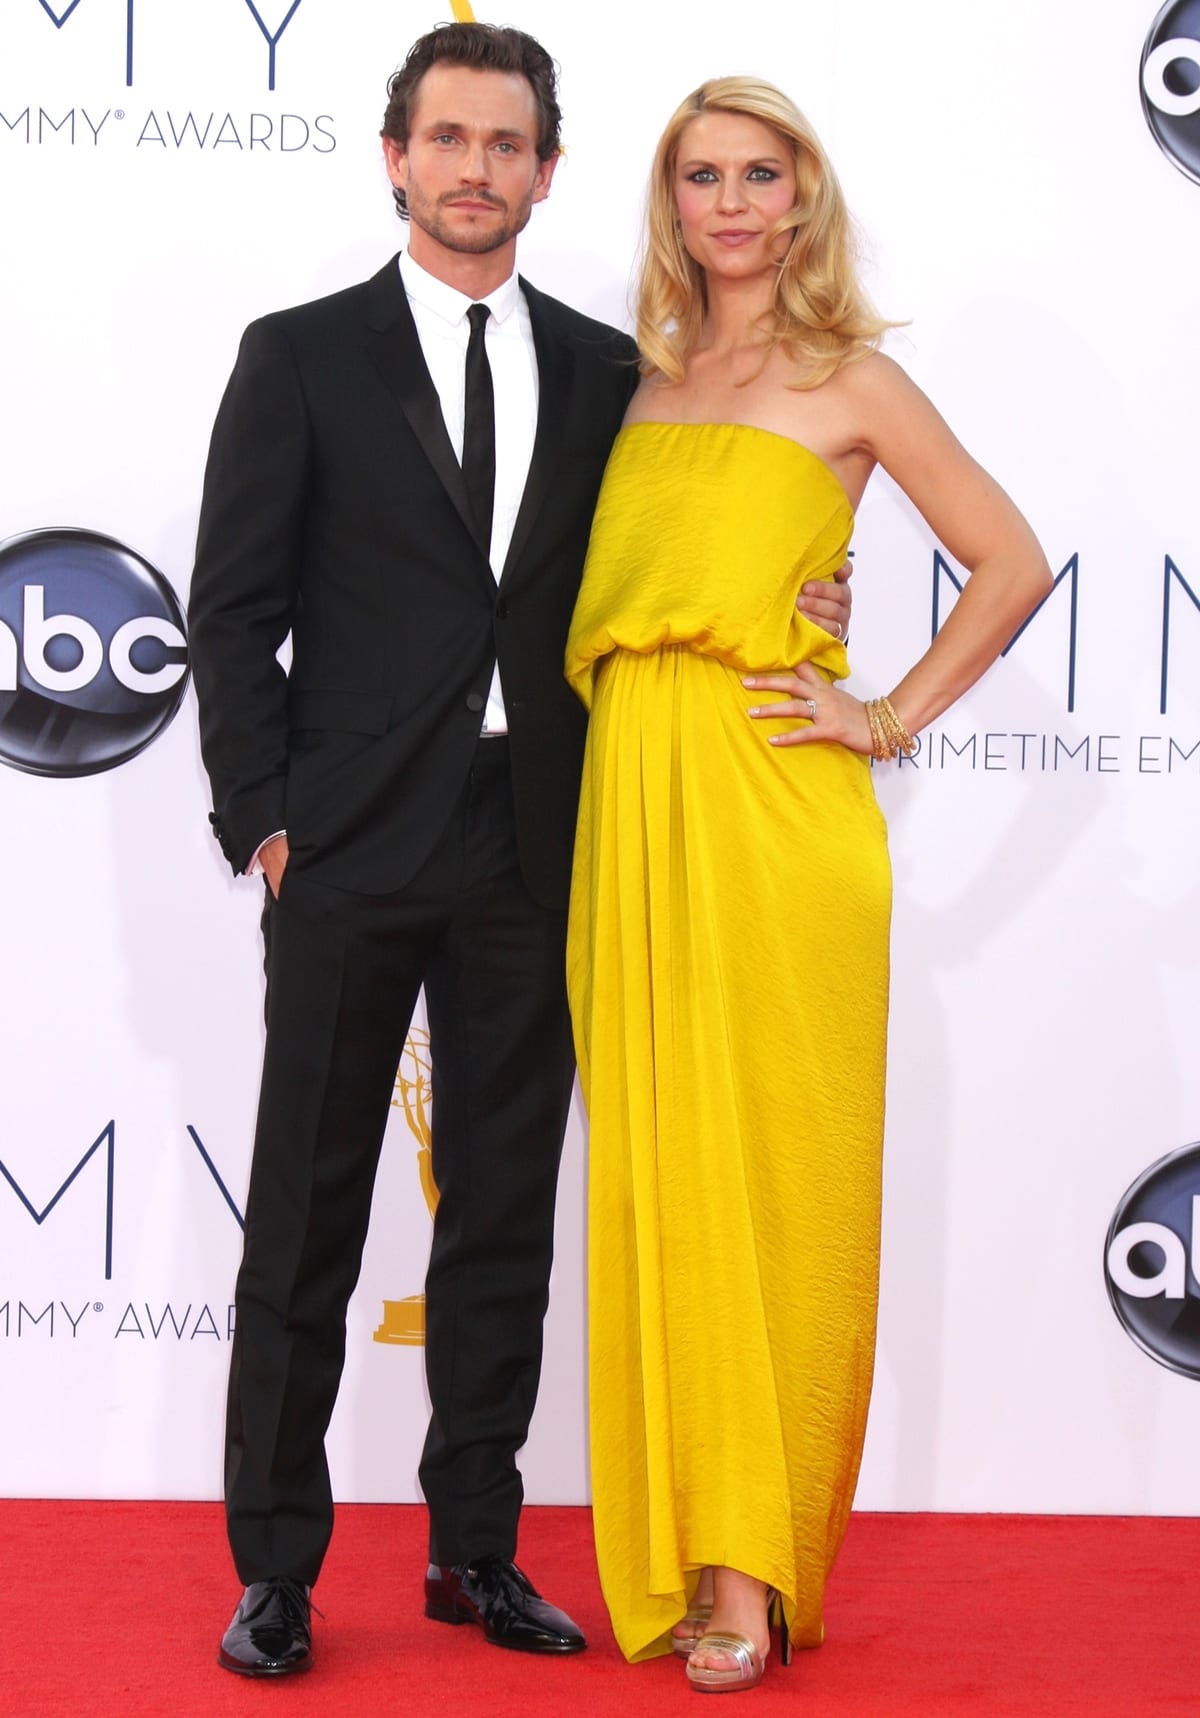 Claire Danes showed off her baby bump in a canary yellow Lanvin dress with her husband Hugh Dancy